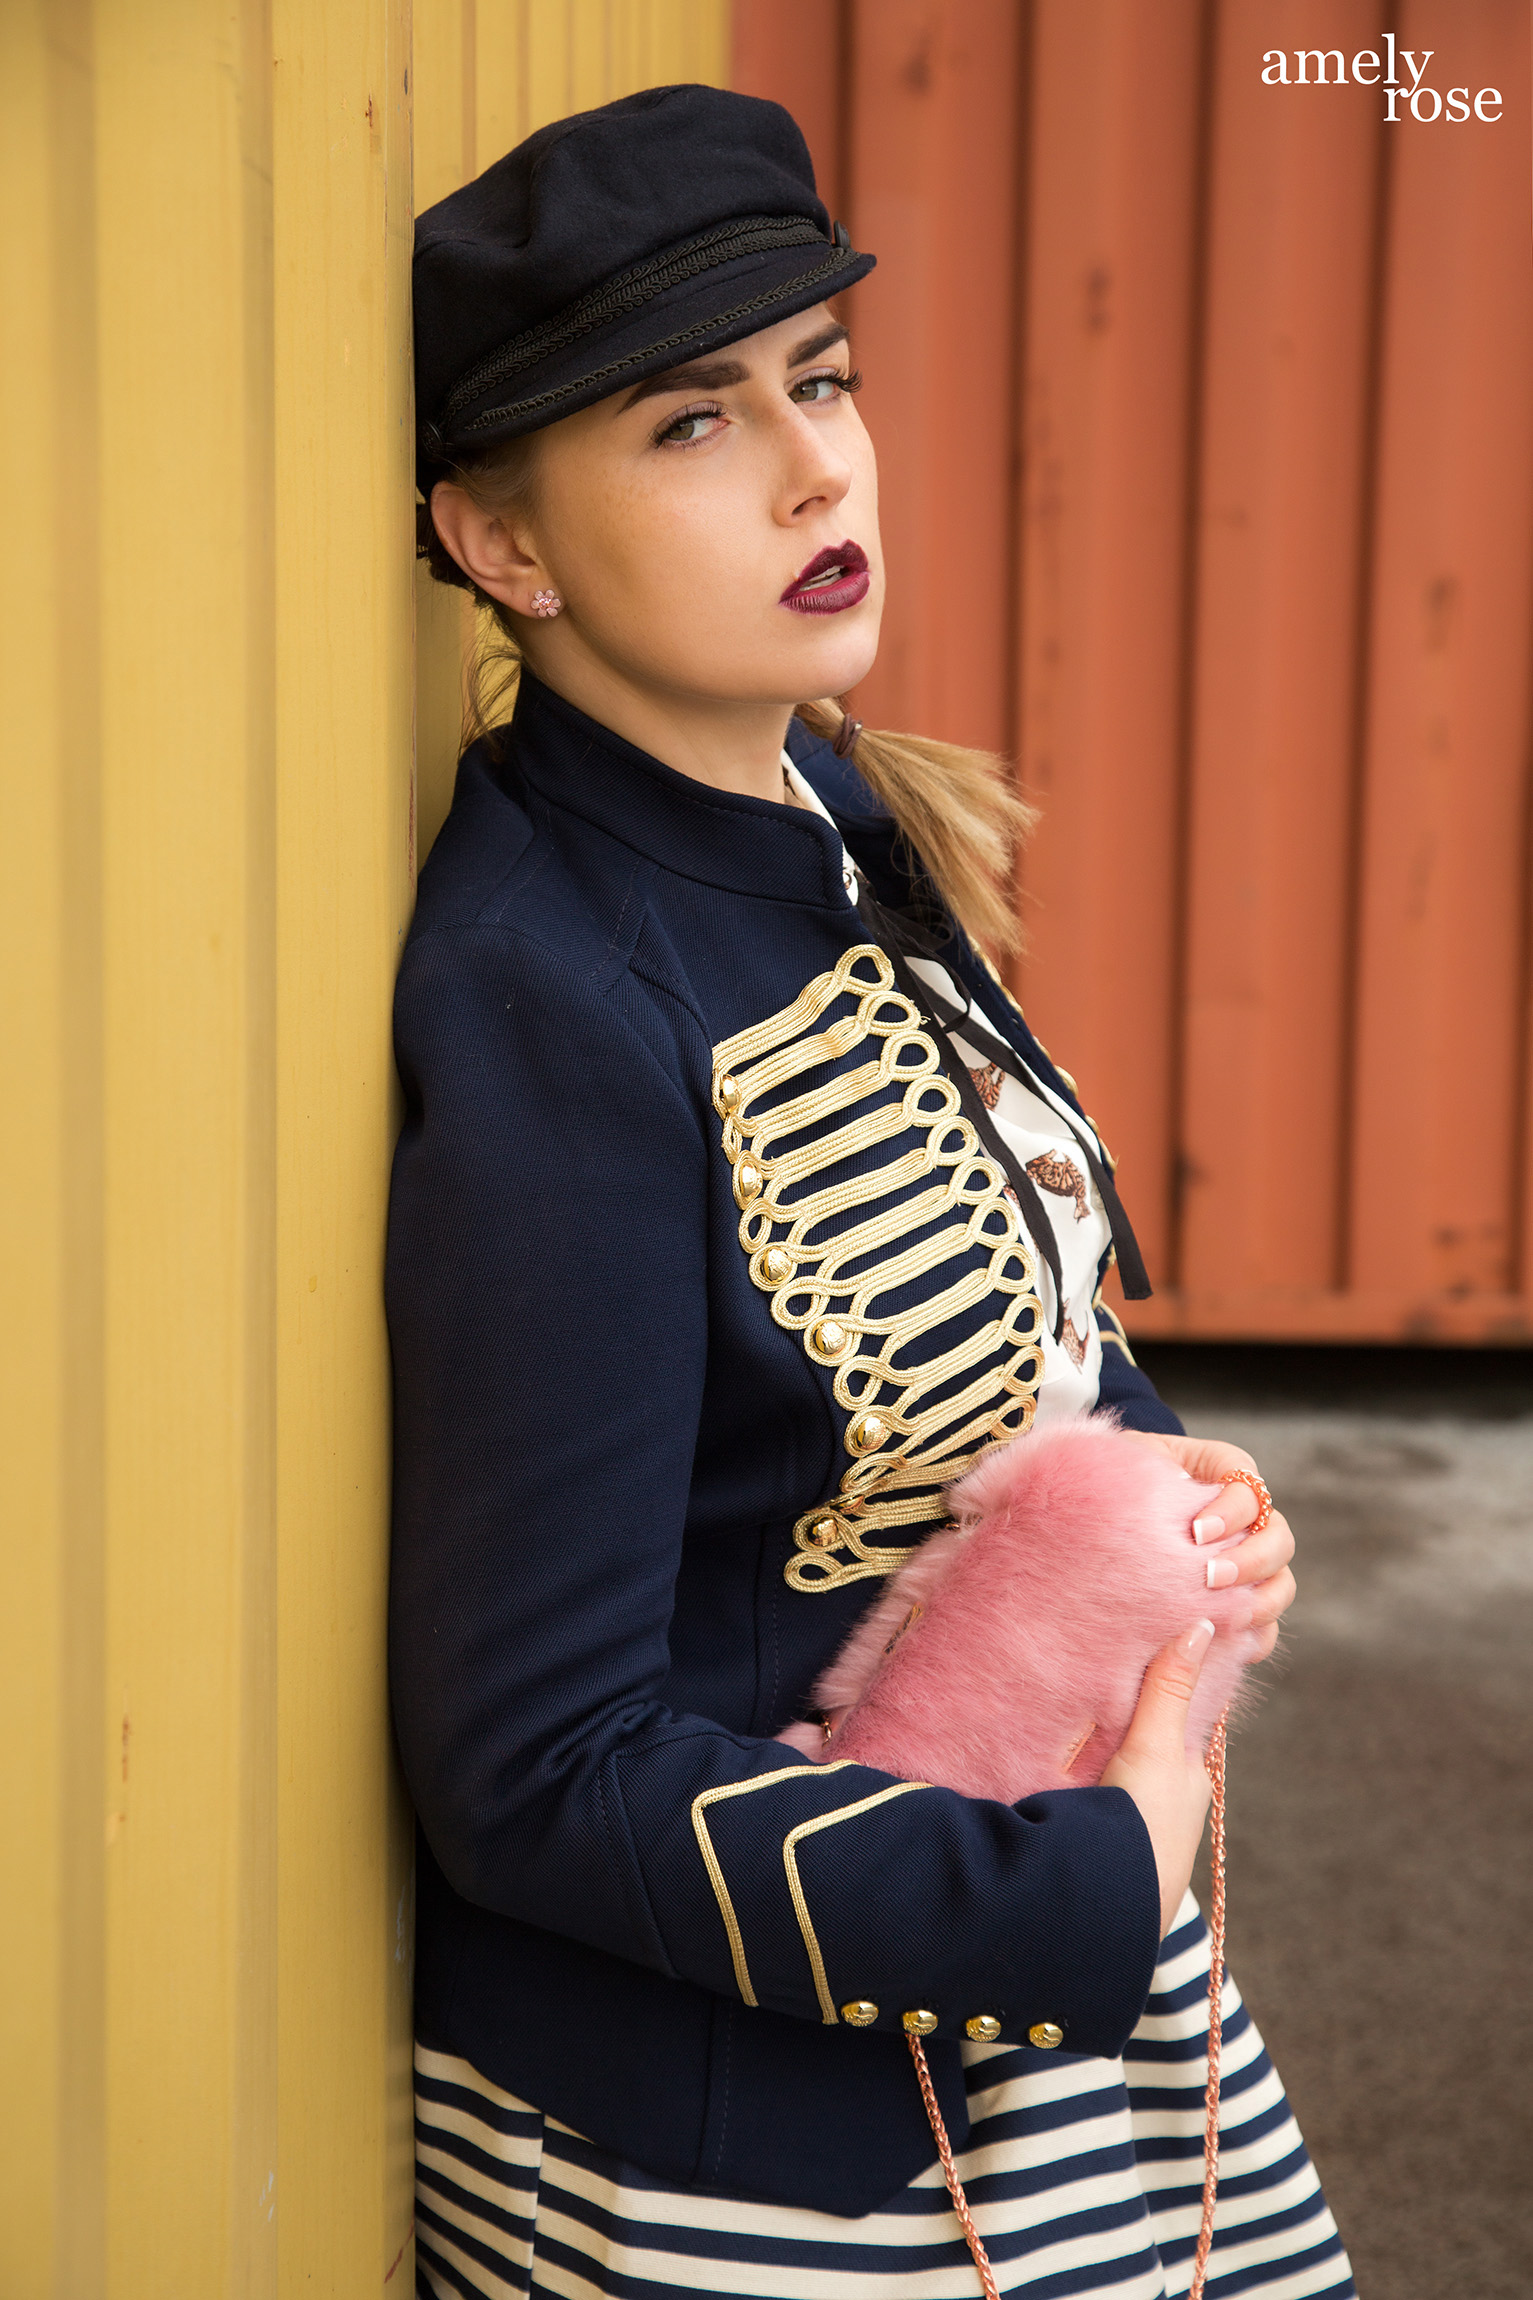 amely rose a german fashion blogger wearing a marine uniform as a summerlook with a catprint blouse and hat